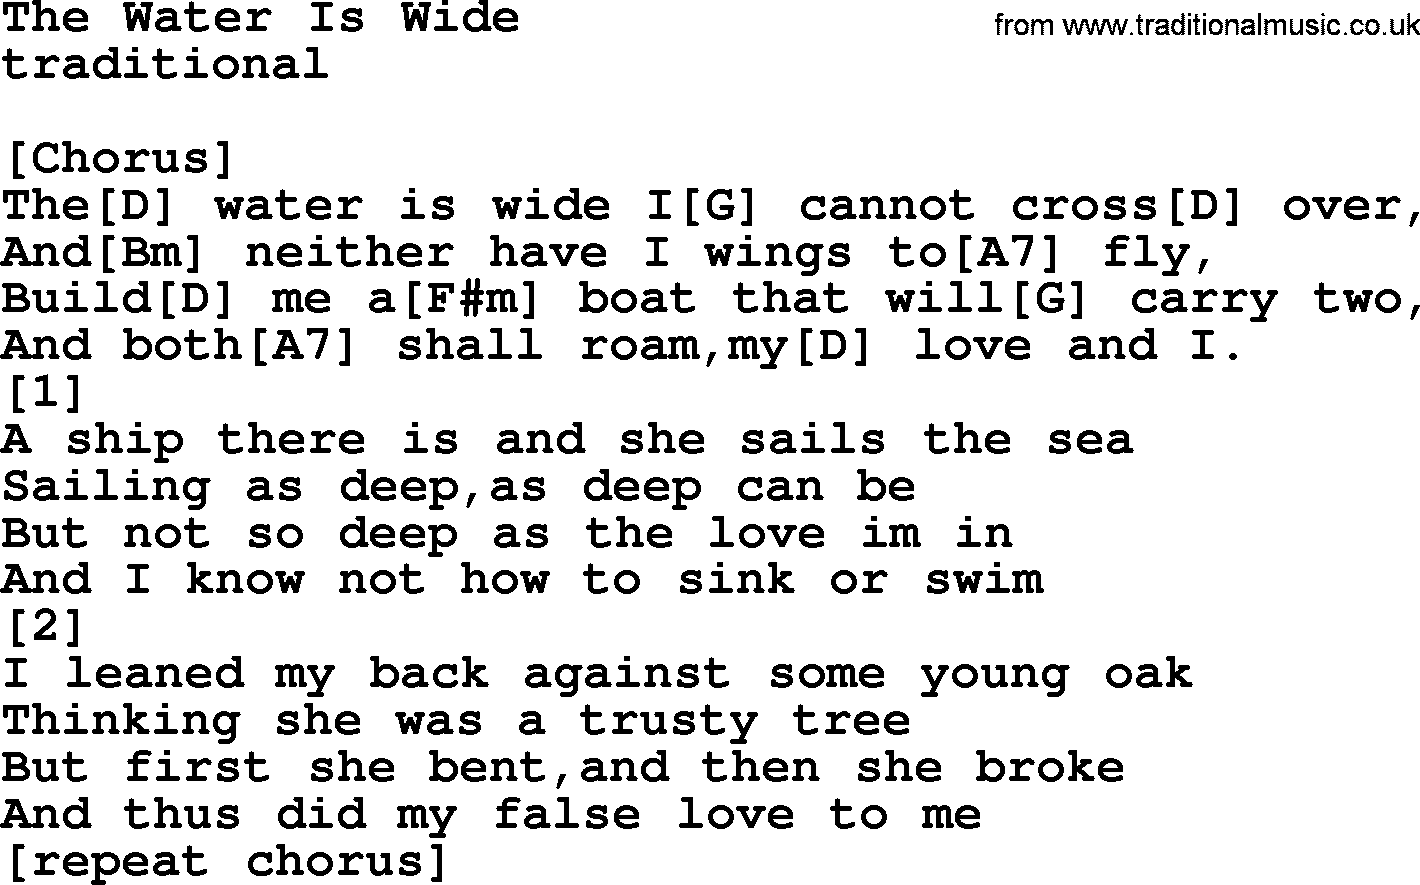 Top 1000 Most Popular Folk and Old-time Songs: The Water Is Wide, lyrics and chords